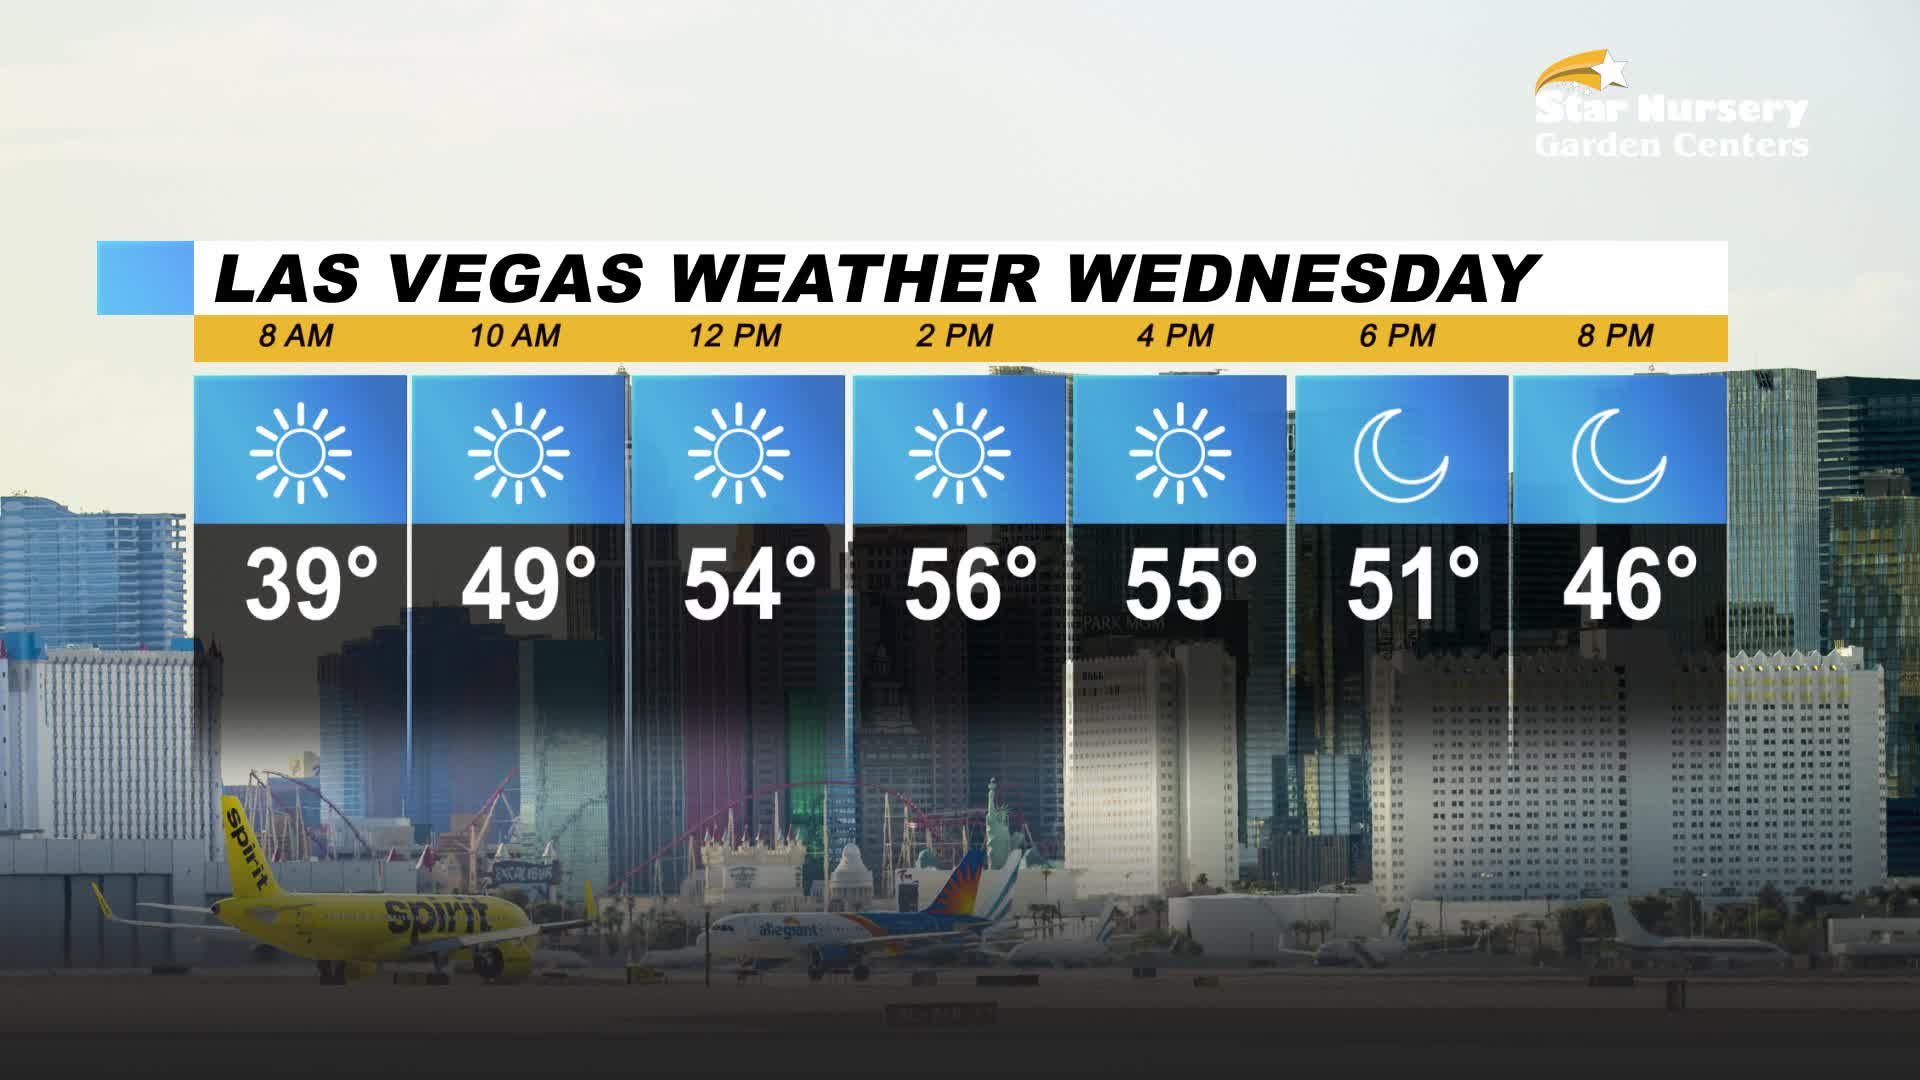 Clear skies with slight wind for Wednesday